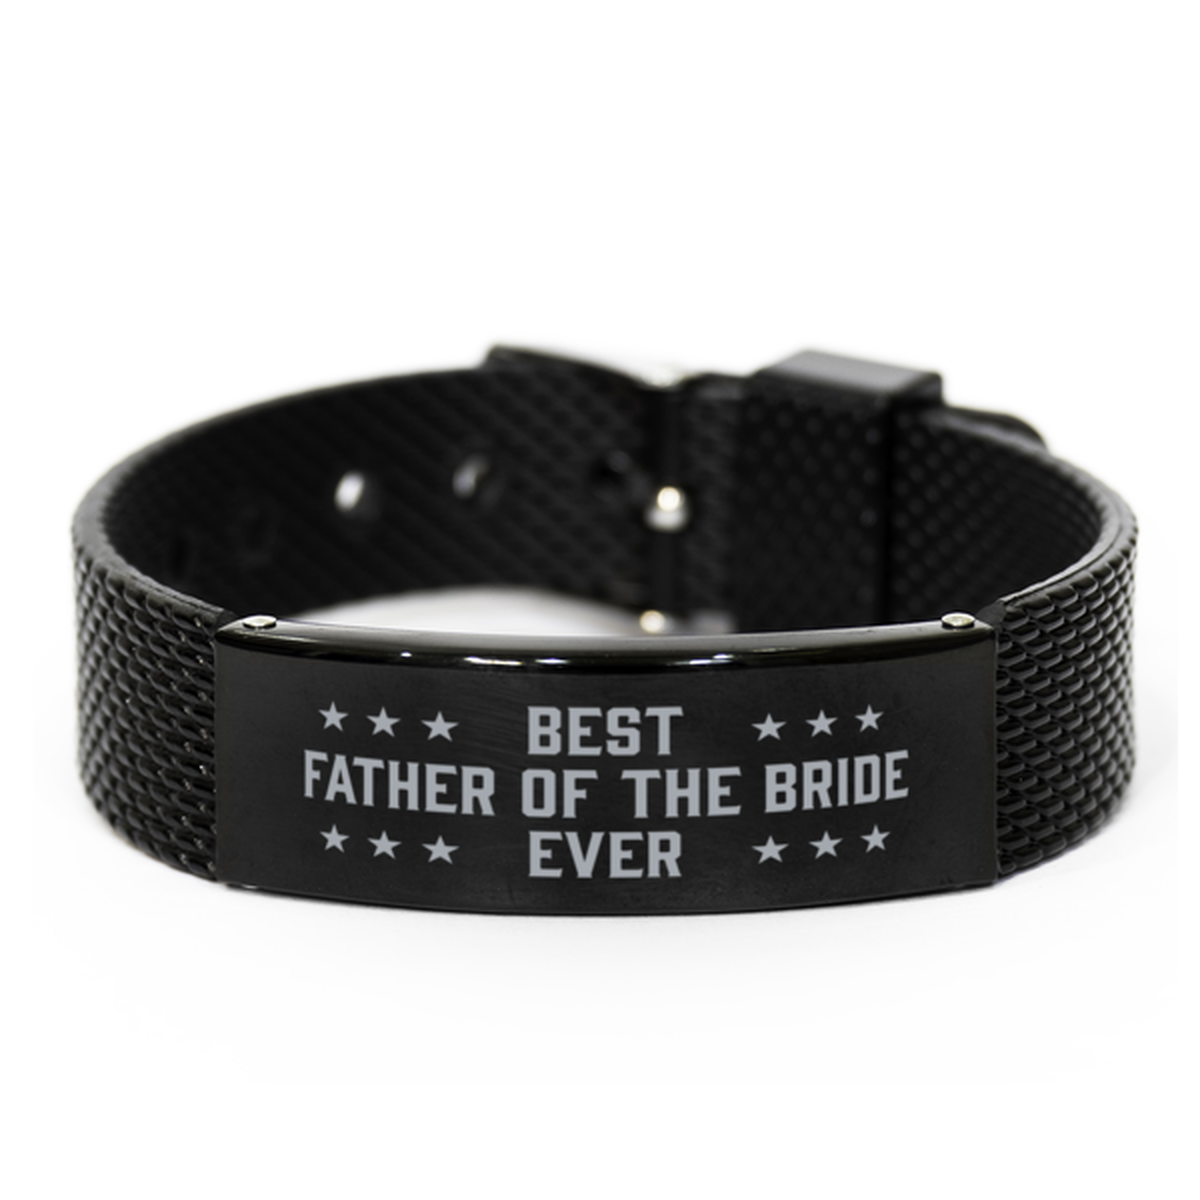 Best Father of the bride Ever Father of the bride Gifts, Gag Engraved Bracelet For Father of the bride, Best Family Gifts For Men